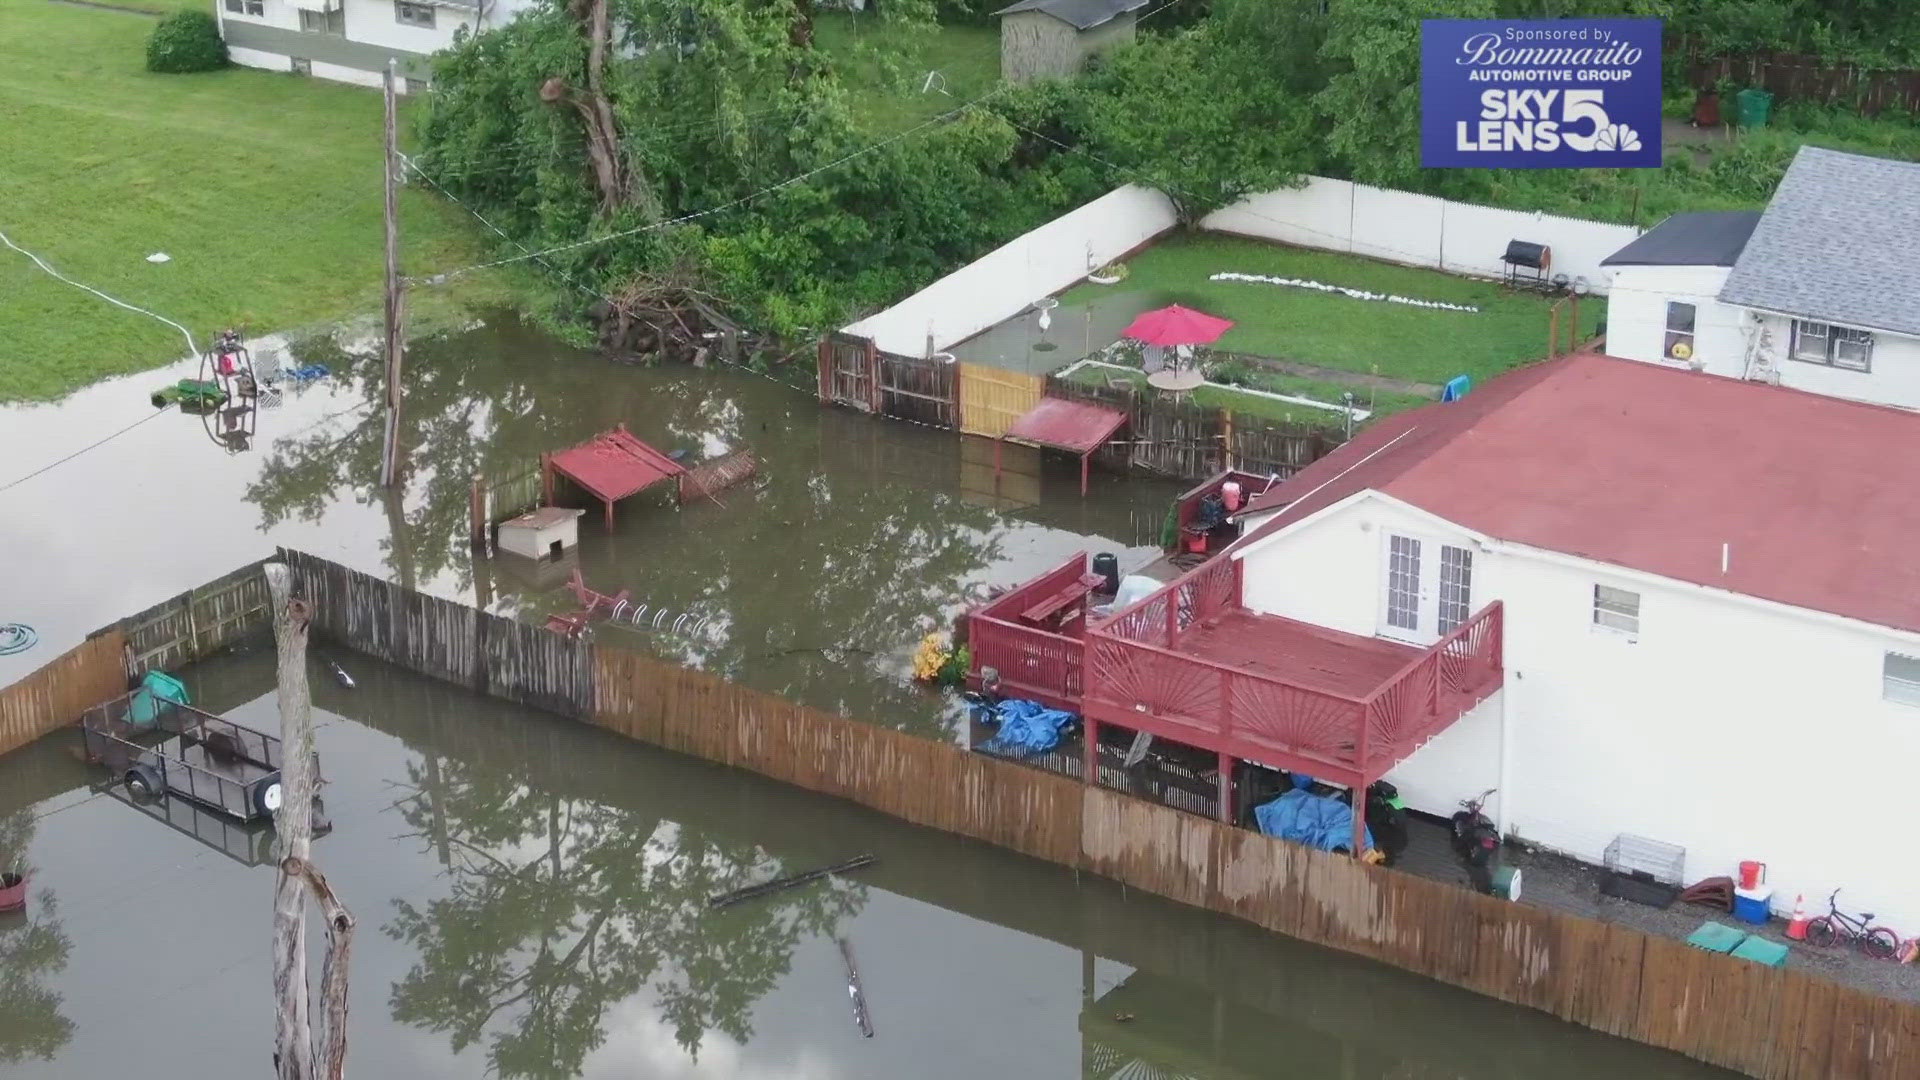 Flash flooding is nothing new in one East St. Louis neighborhood. Homeowners say their sick of their high-water headaches.